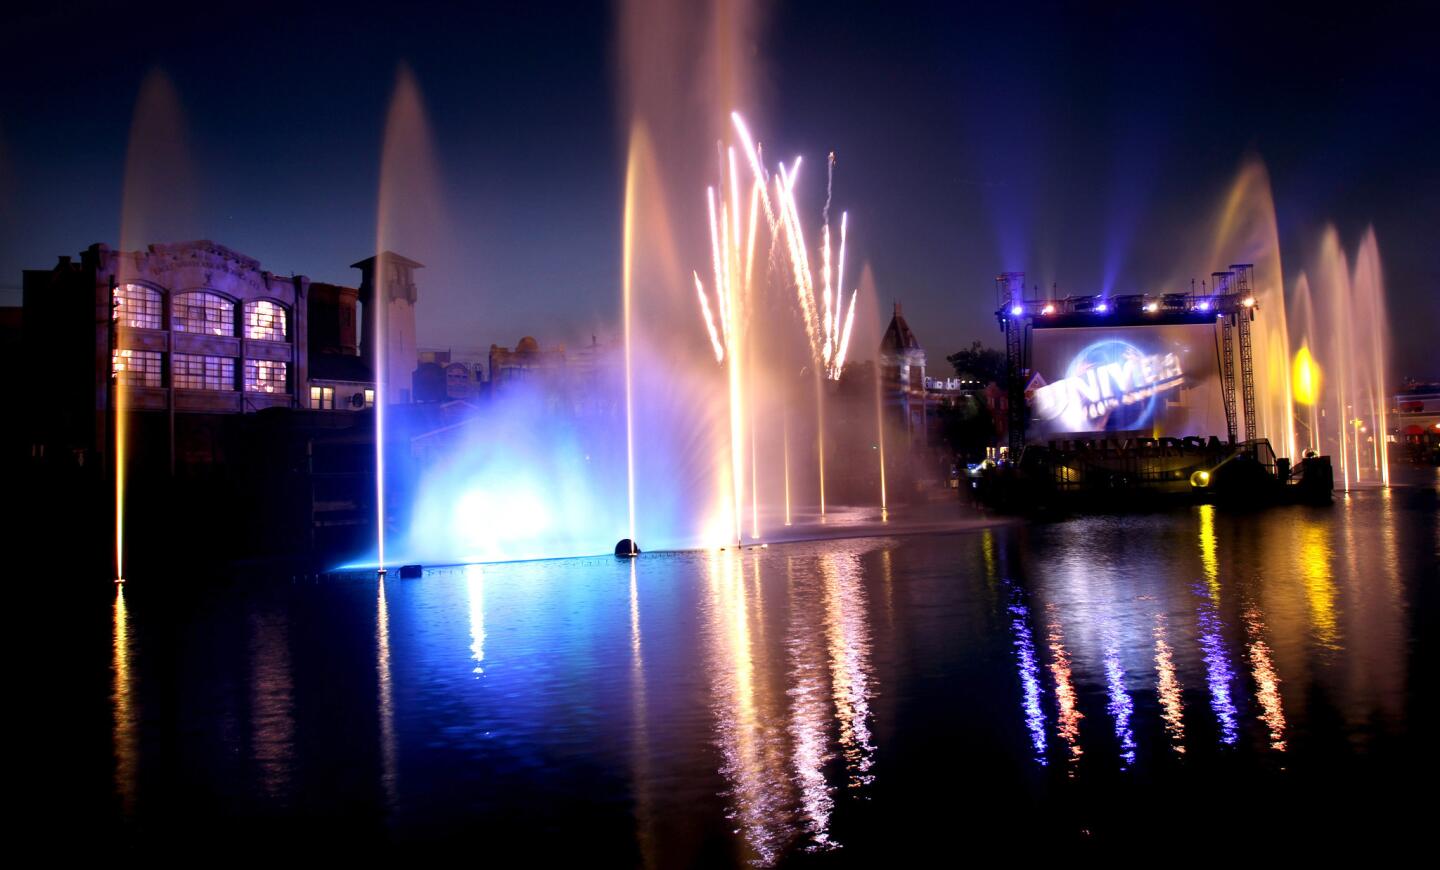 Universal's Cinematic Spectacular show